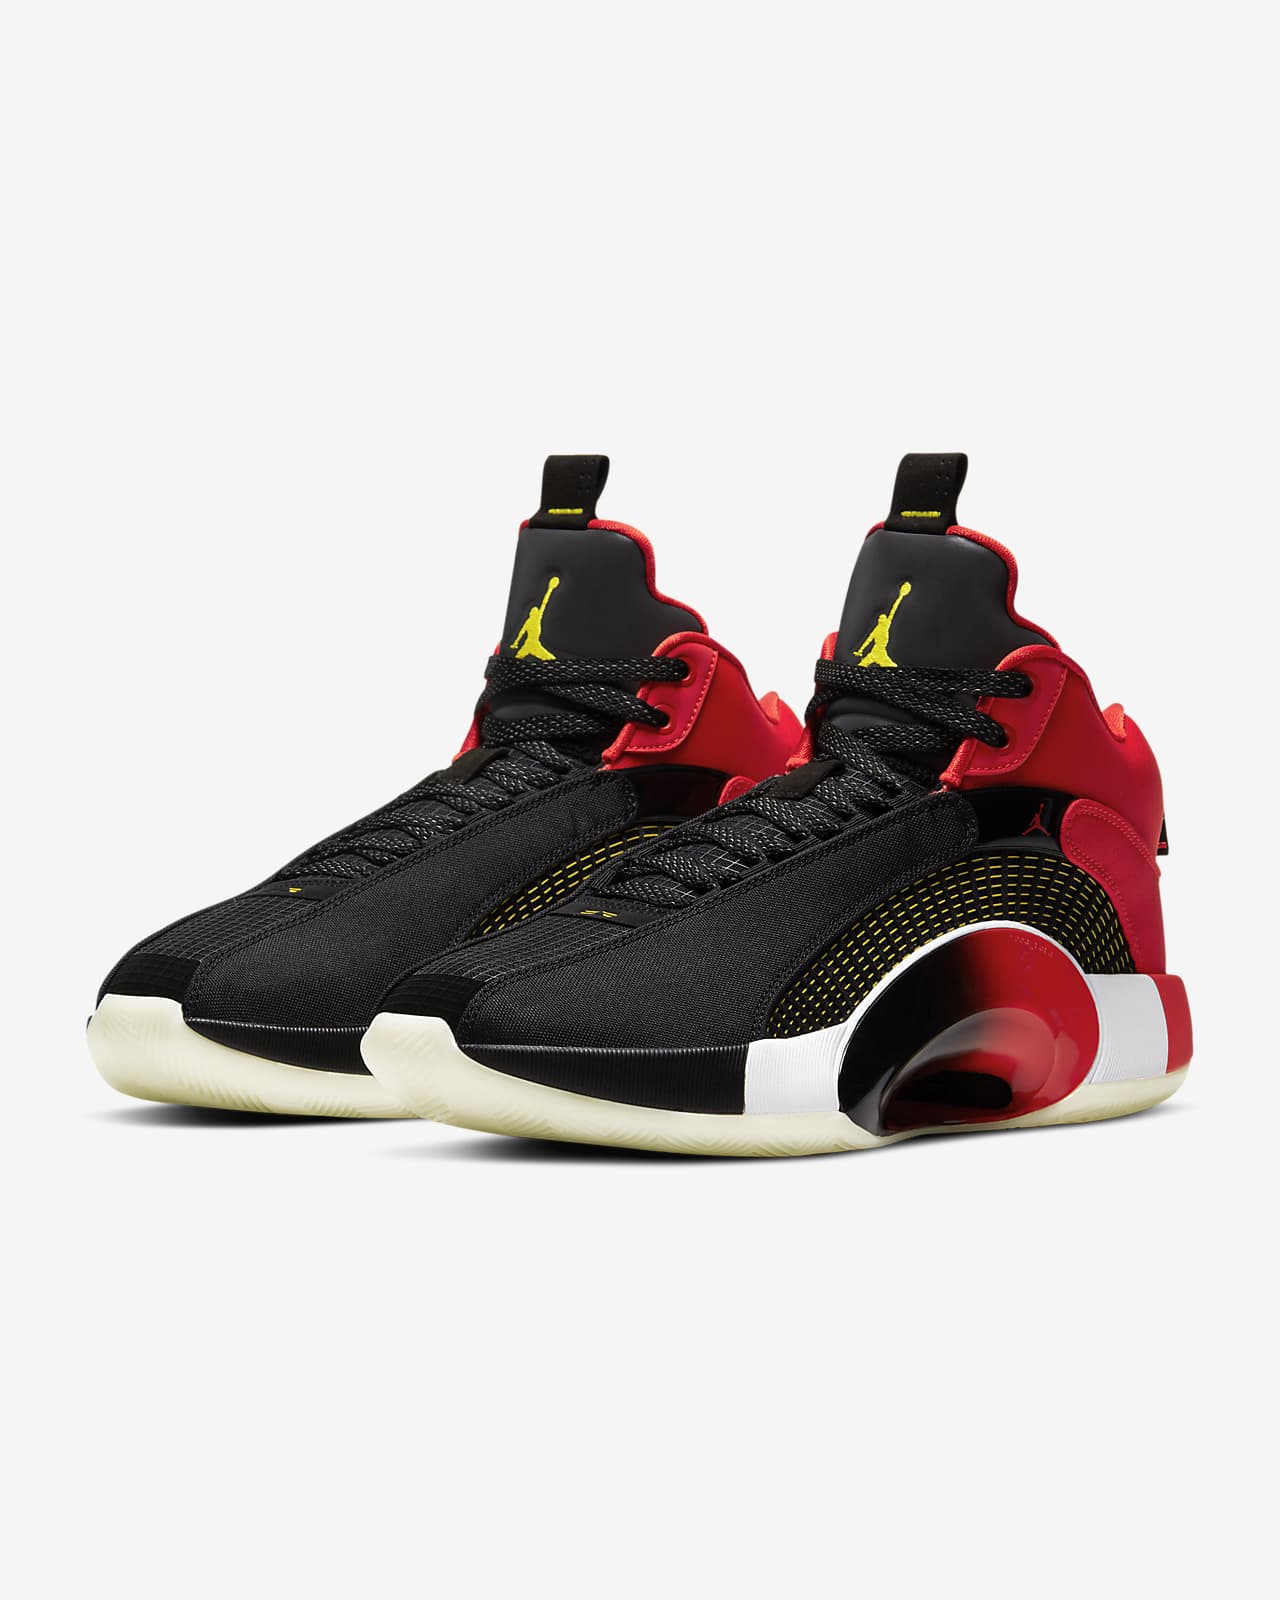 chinese new year's jordans